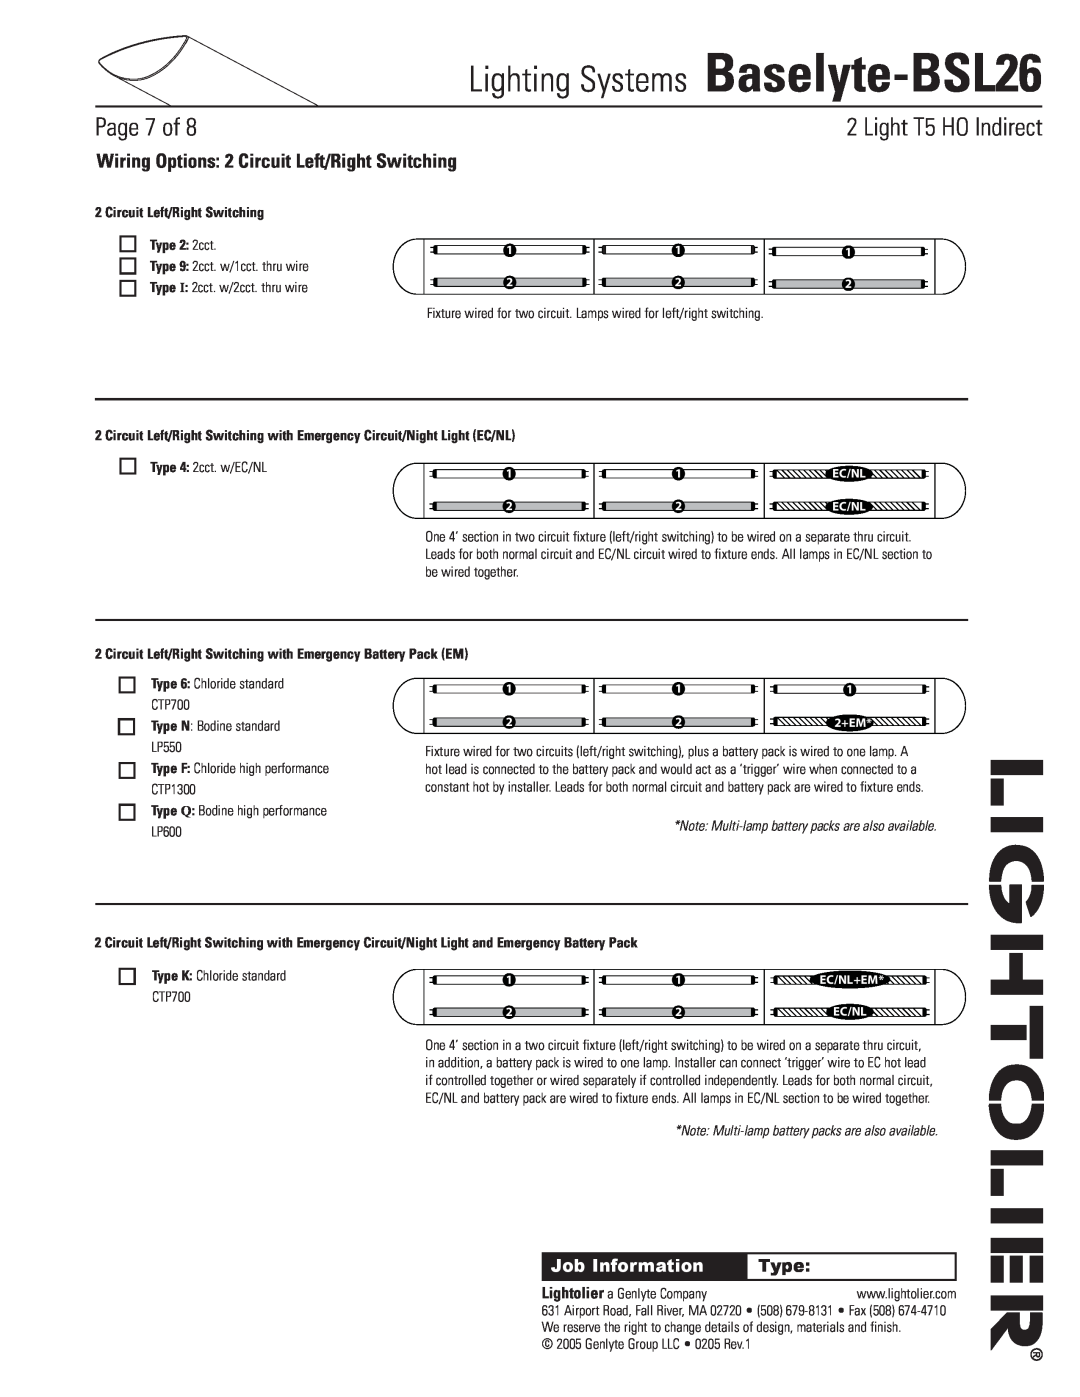 Lightolier Baselyte-BSL26 Wiring Options 2 Circuit Left/Right Switching, Circuit Left/Right Switching Type 2 2cct, Page of 